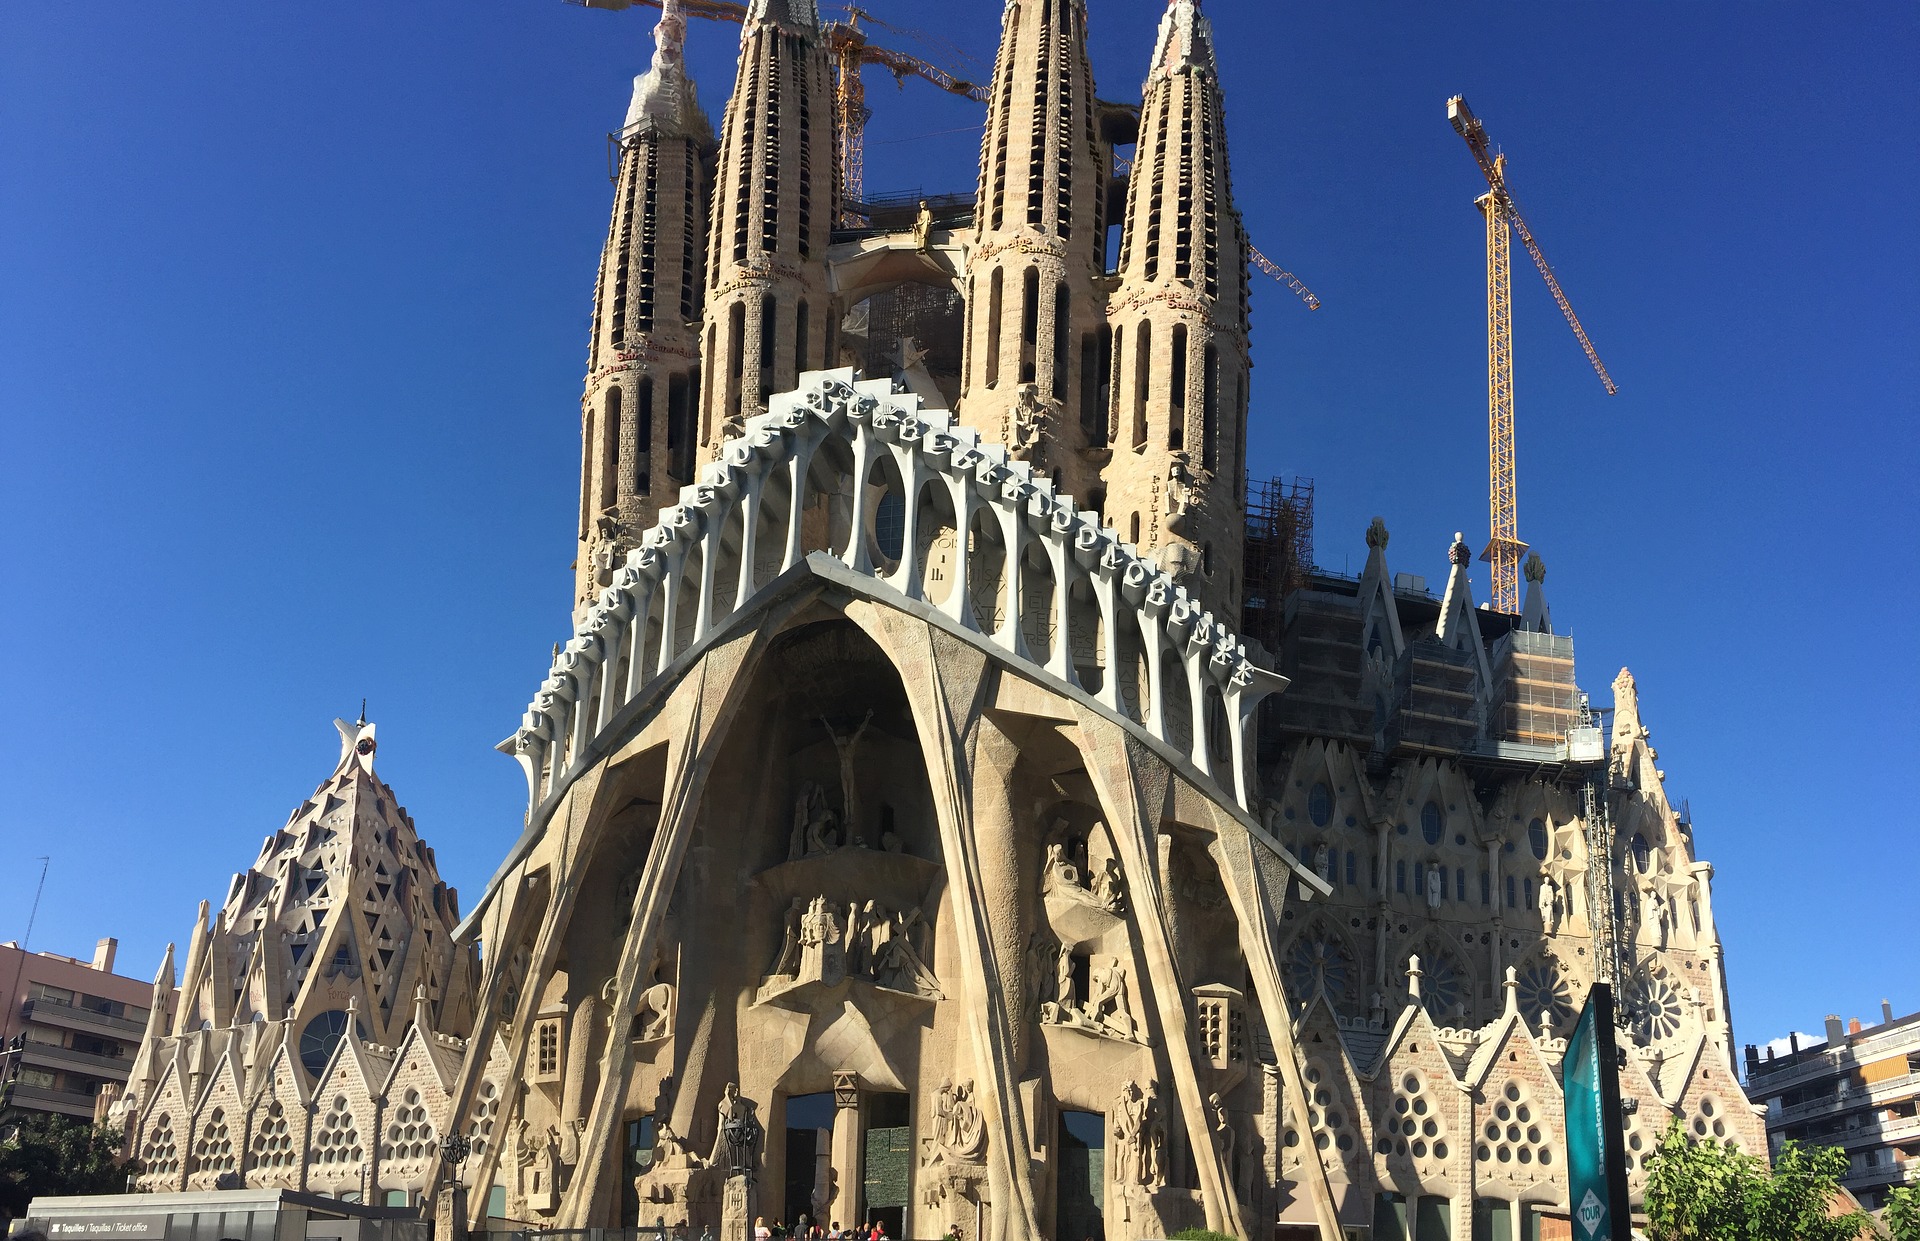 A few days in Barcelona: what ought to be seen?